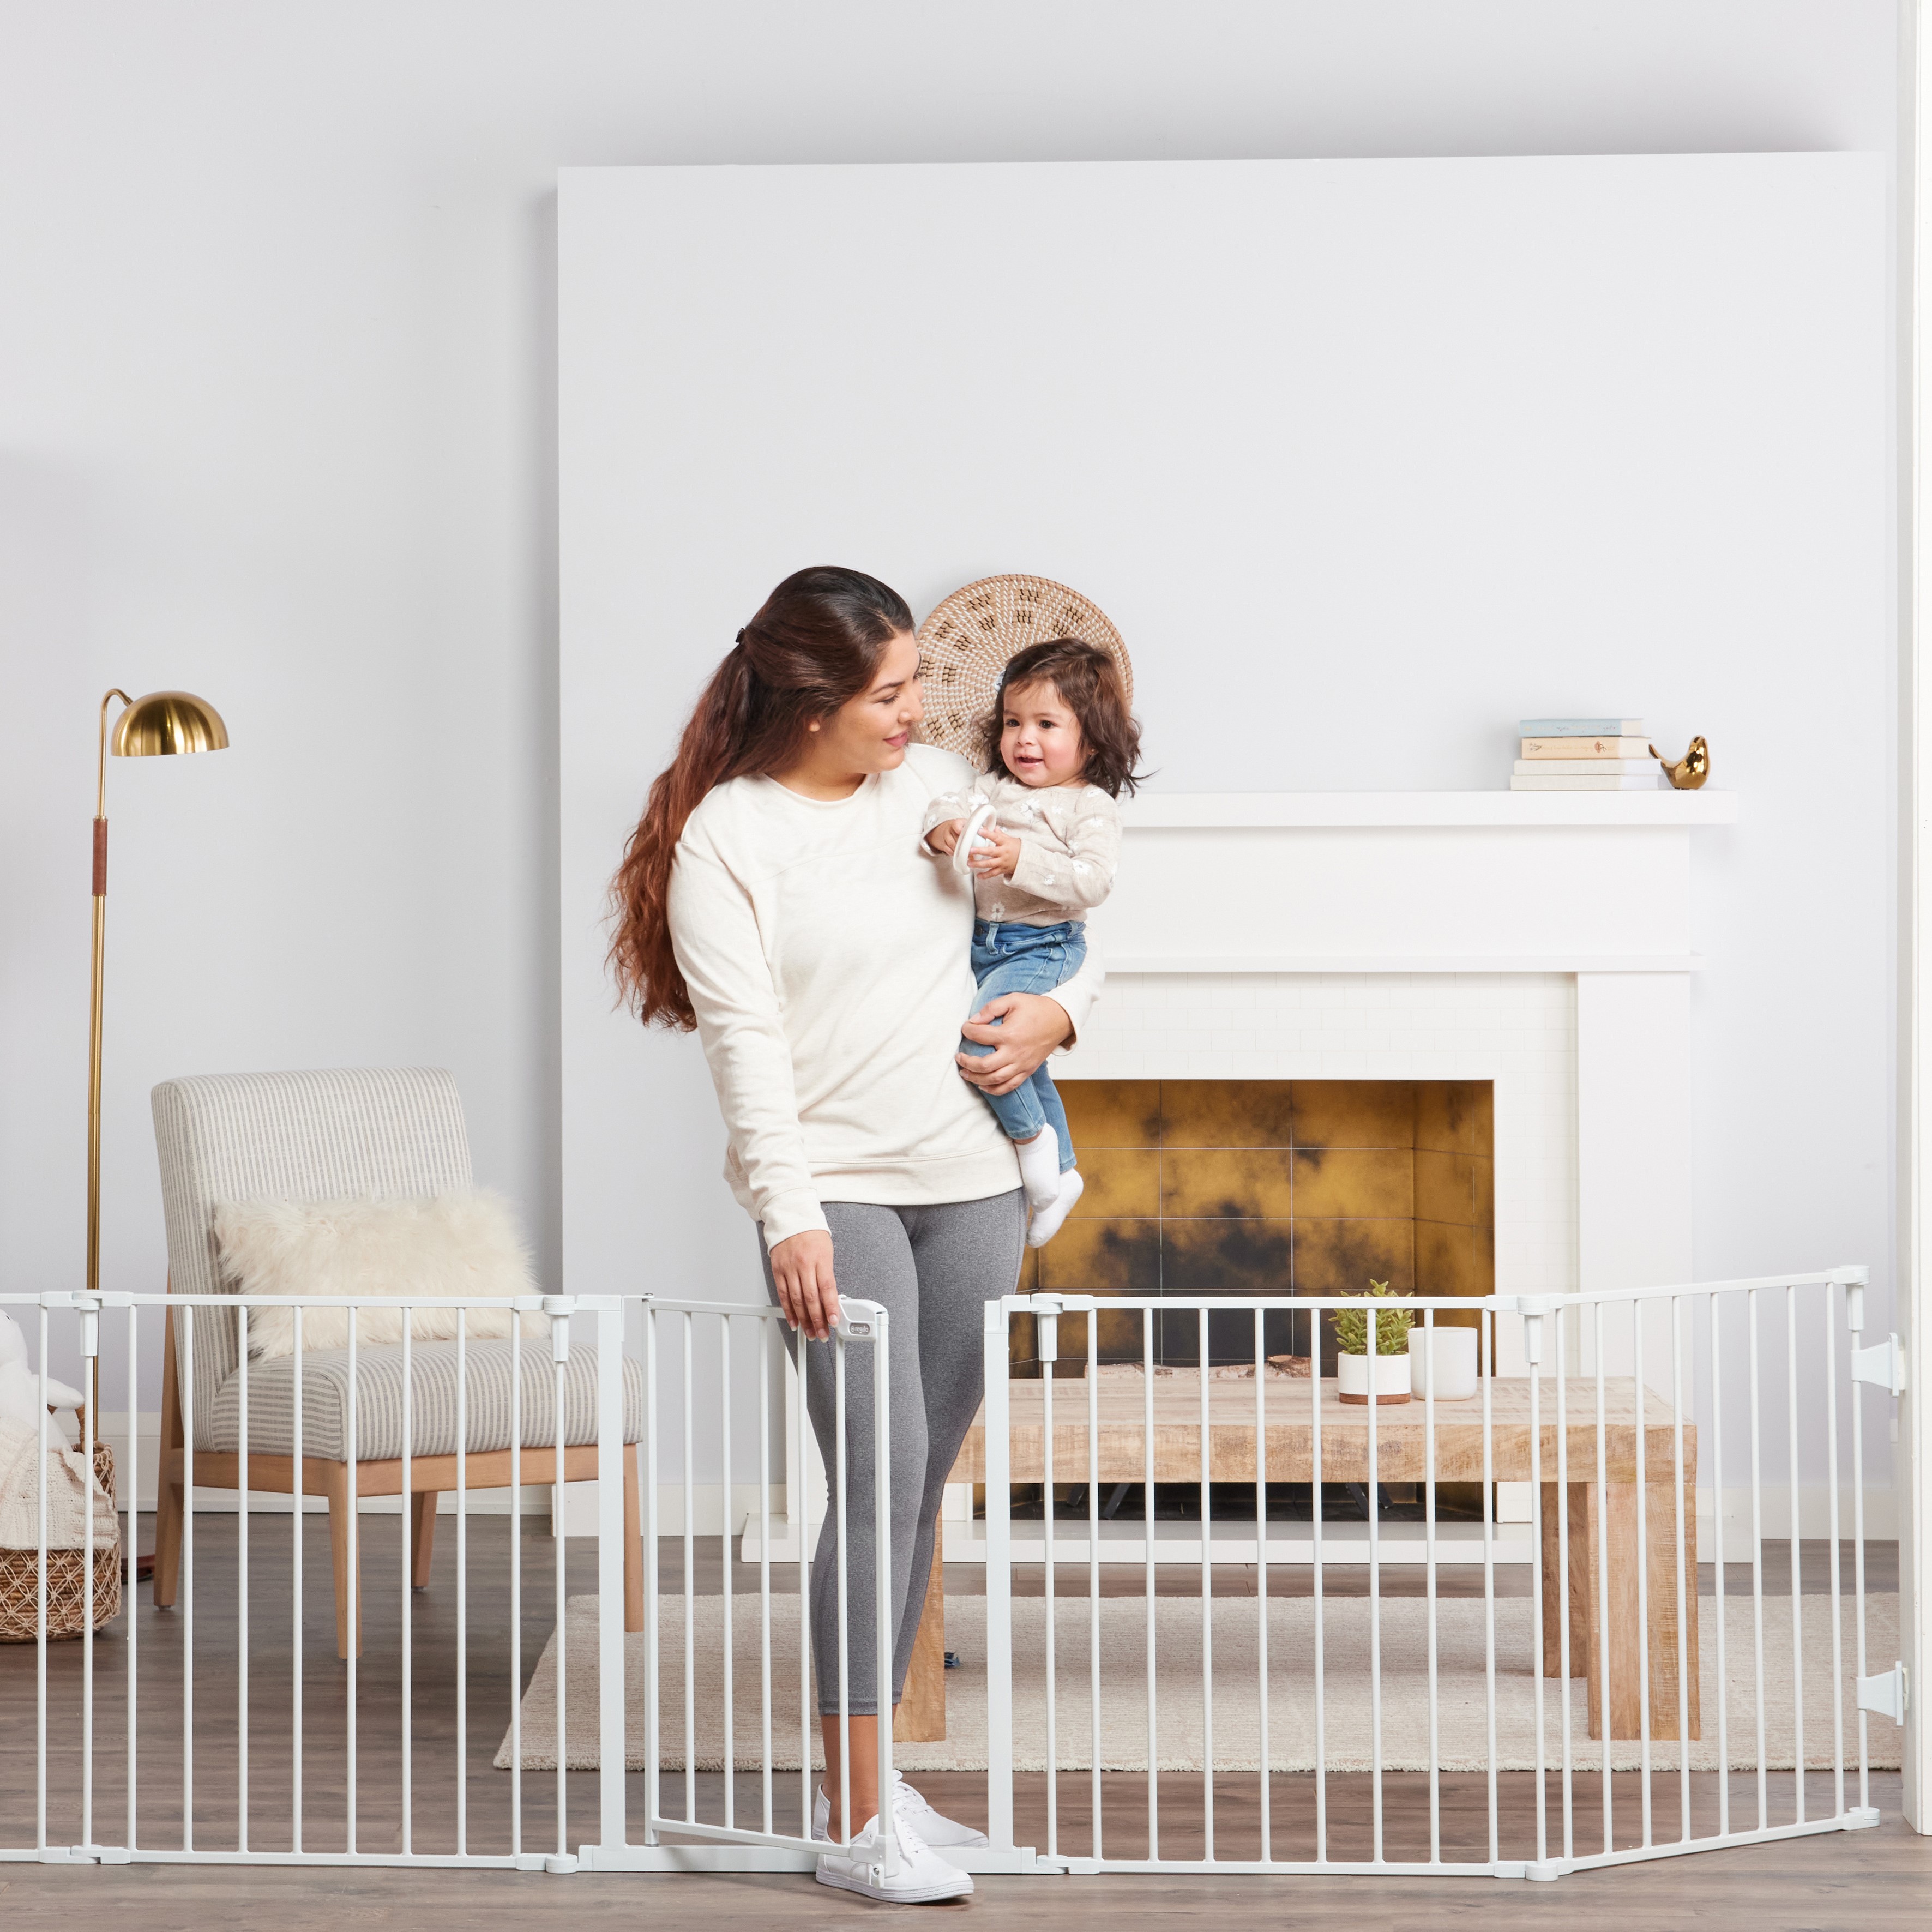 Regalo Super Wide Baby Gate, Features Play Yard Option, White, 144", Age Group 6-24 Months - image 1 of 7